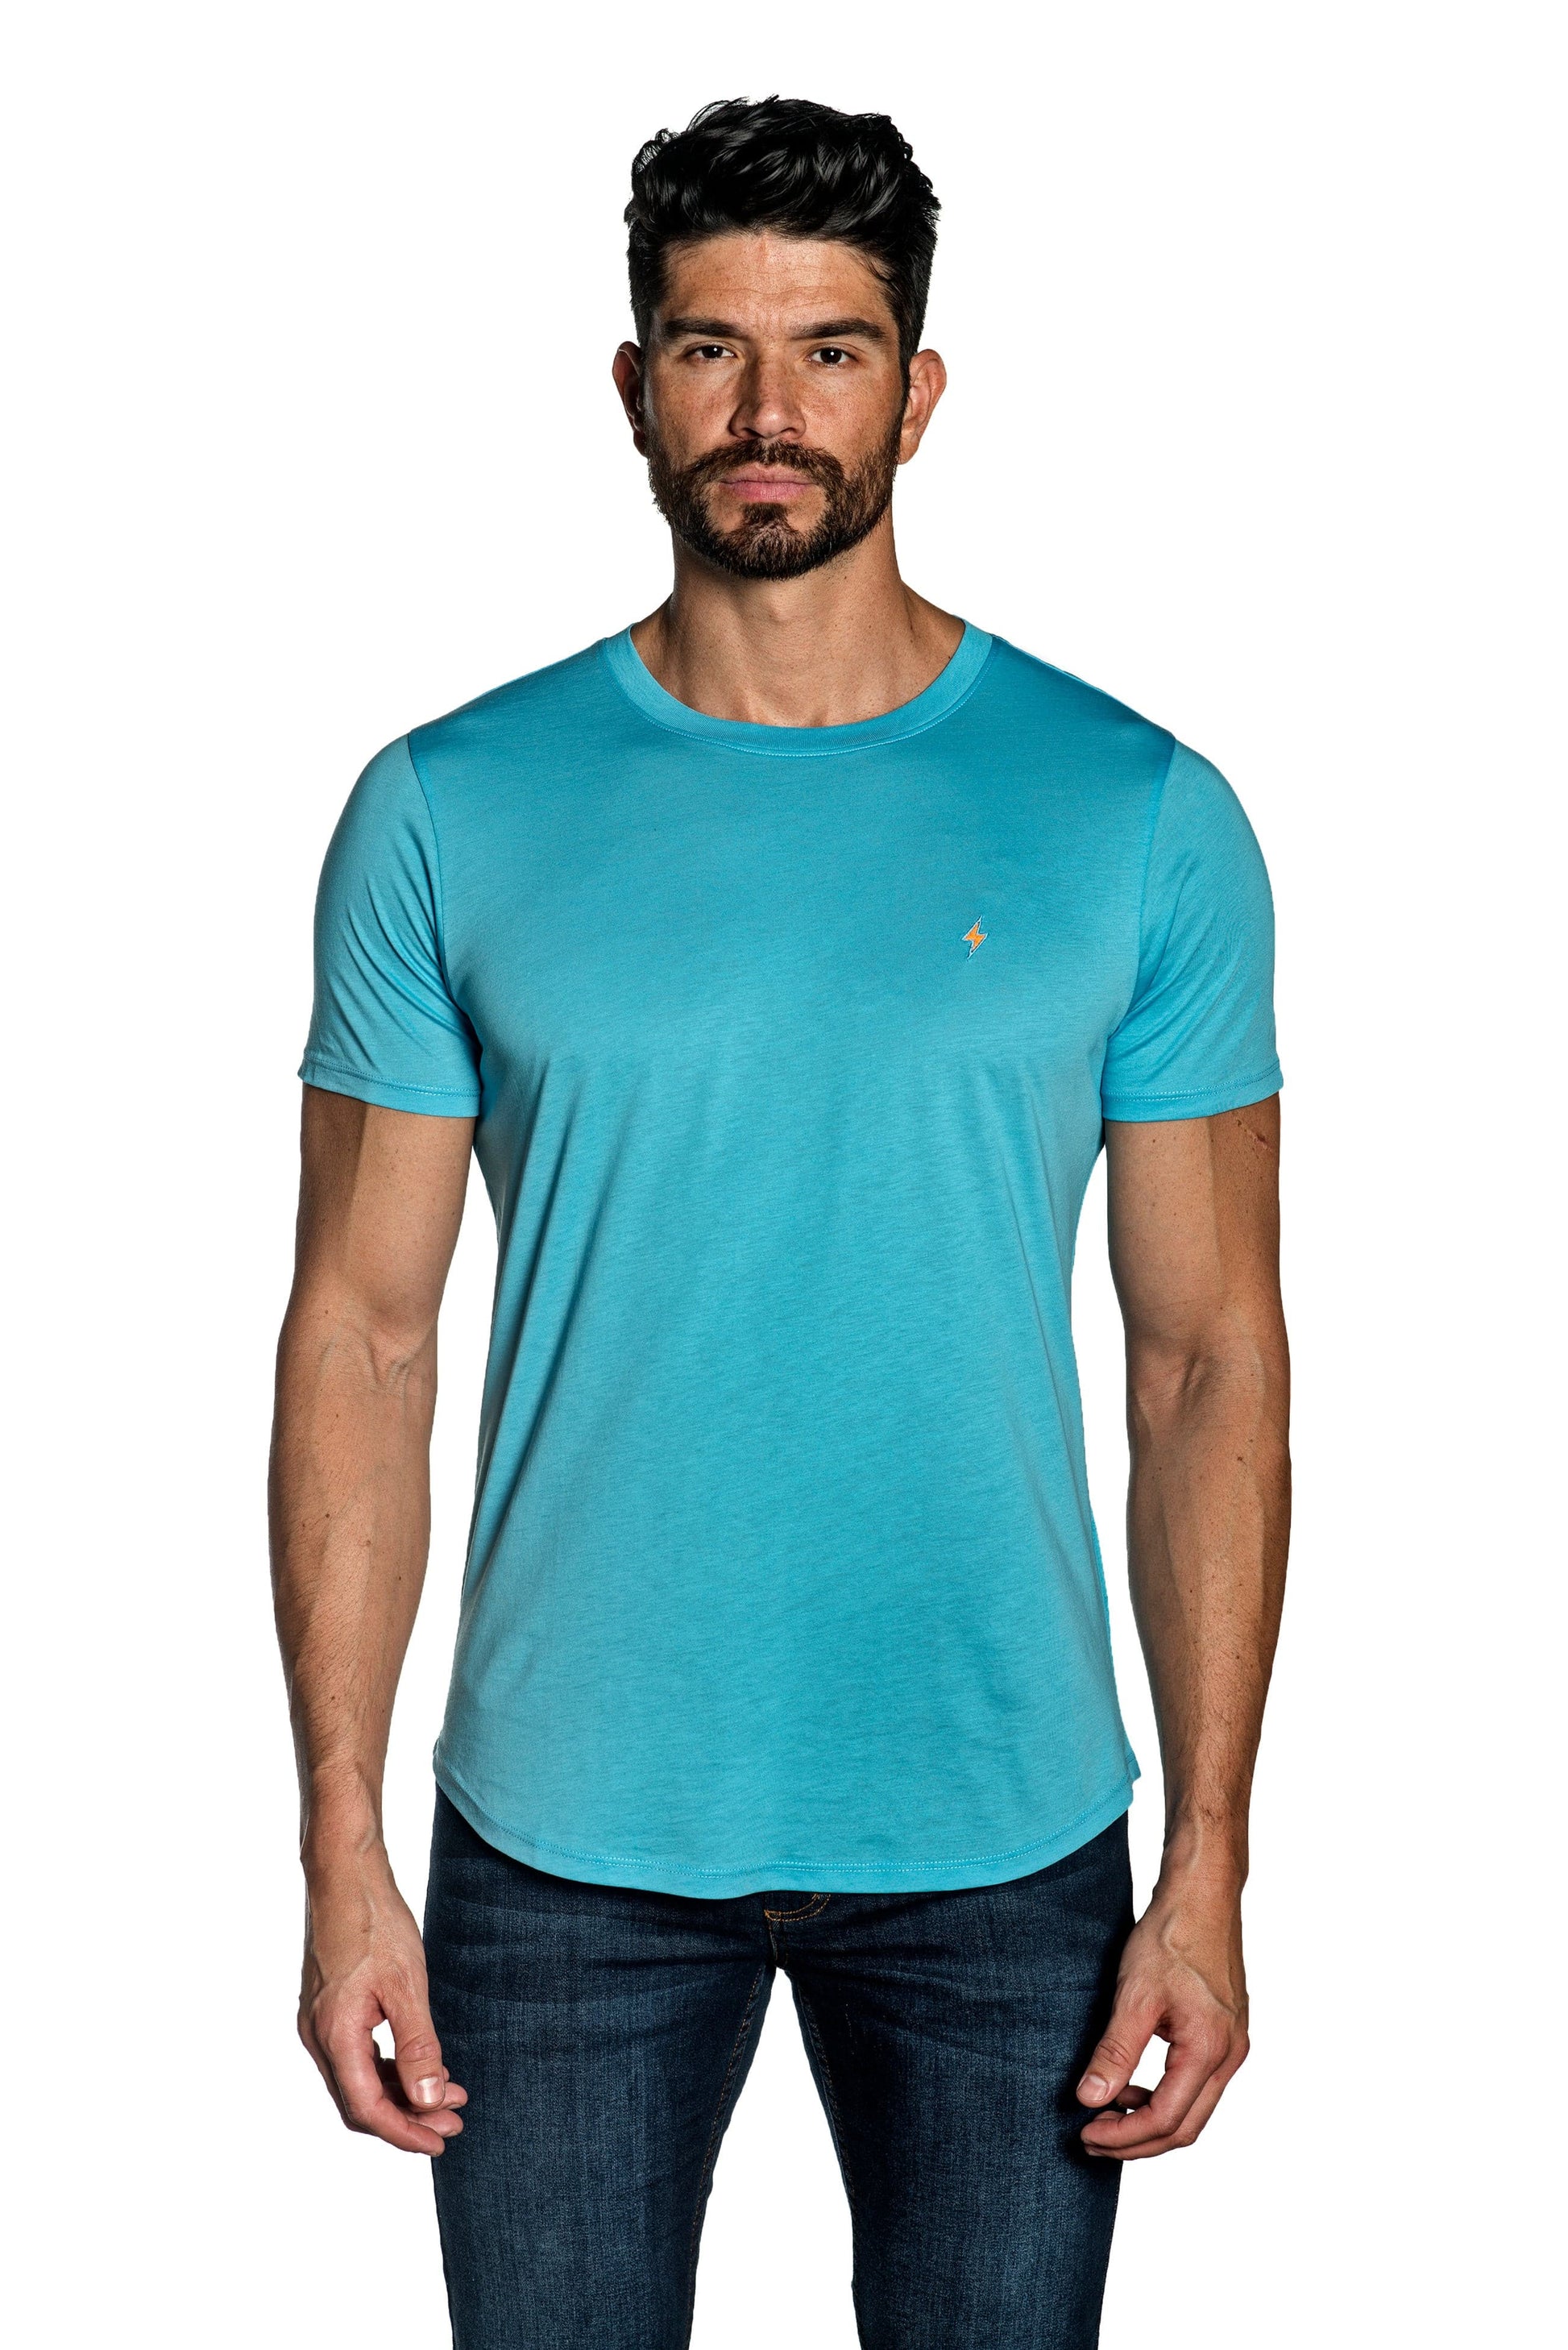 Turquoise Mens Tee With Lightning Embroidery TEE-32.